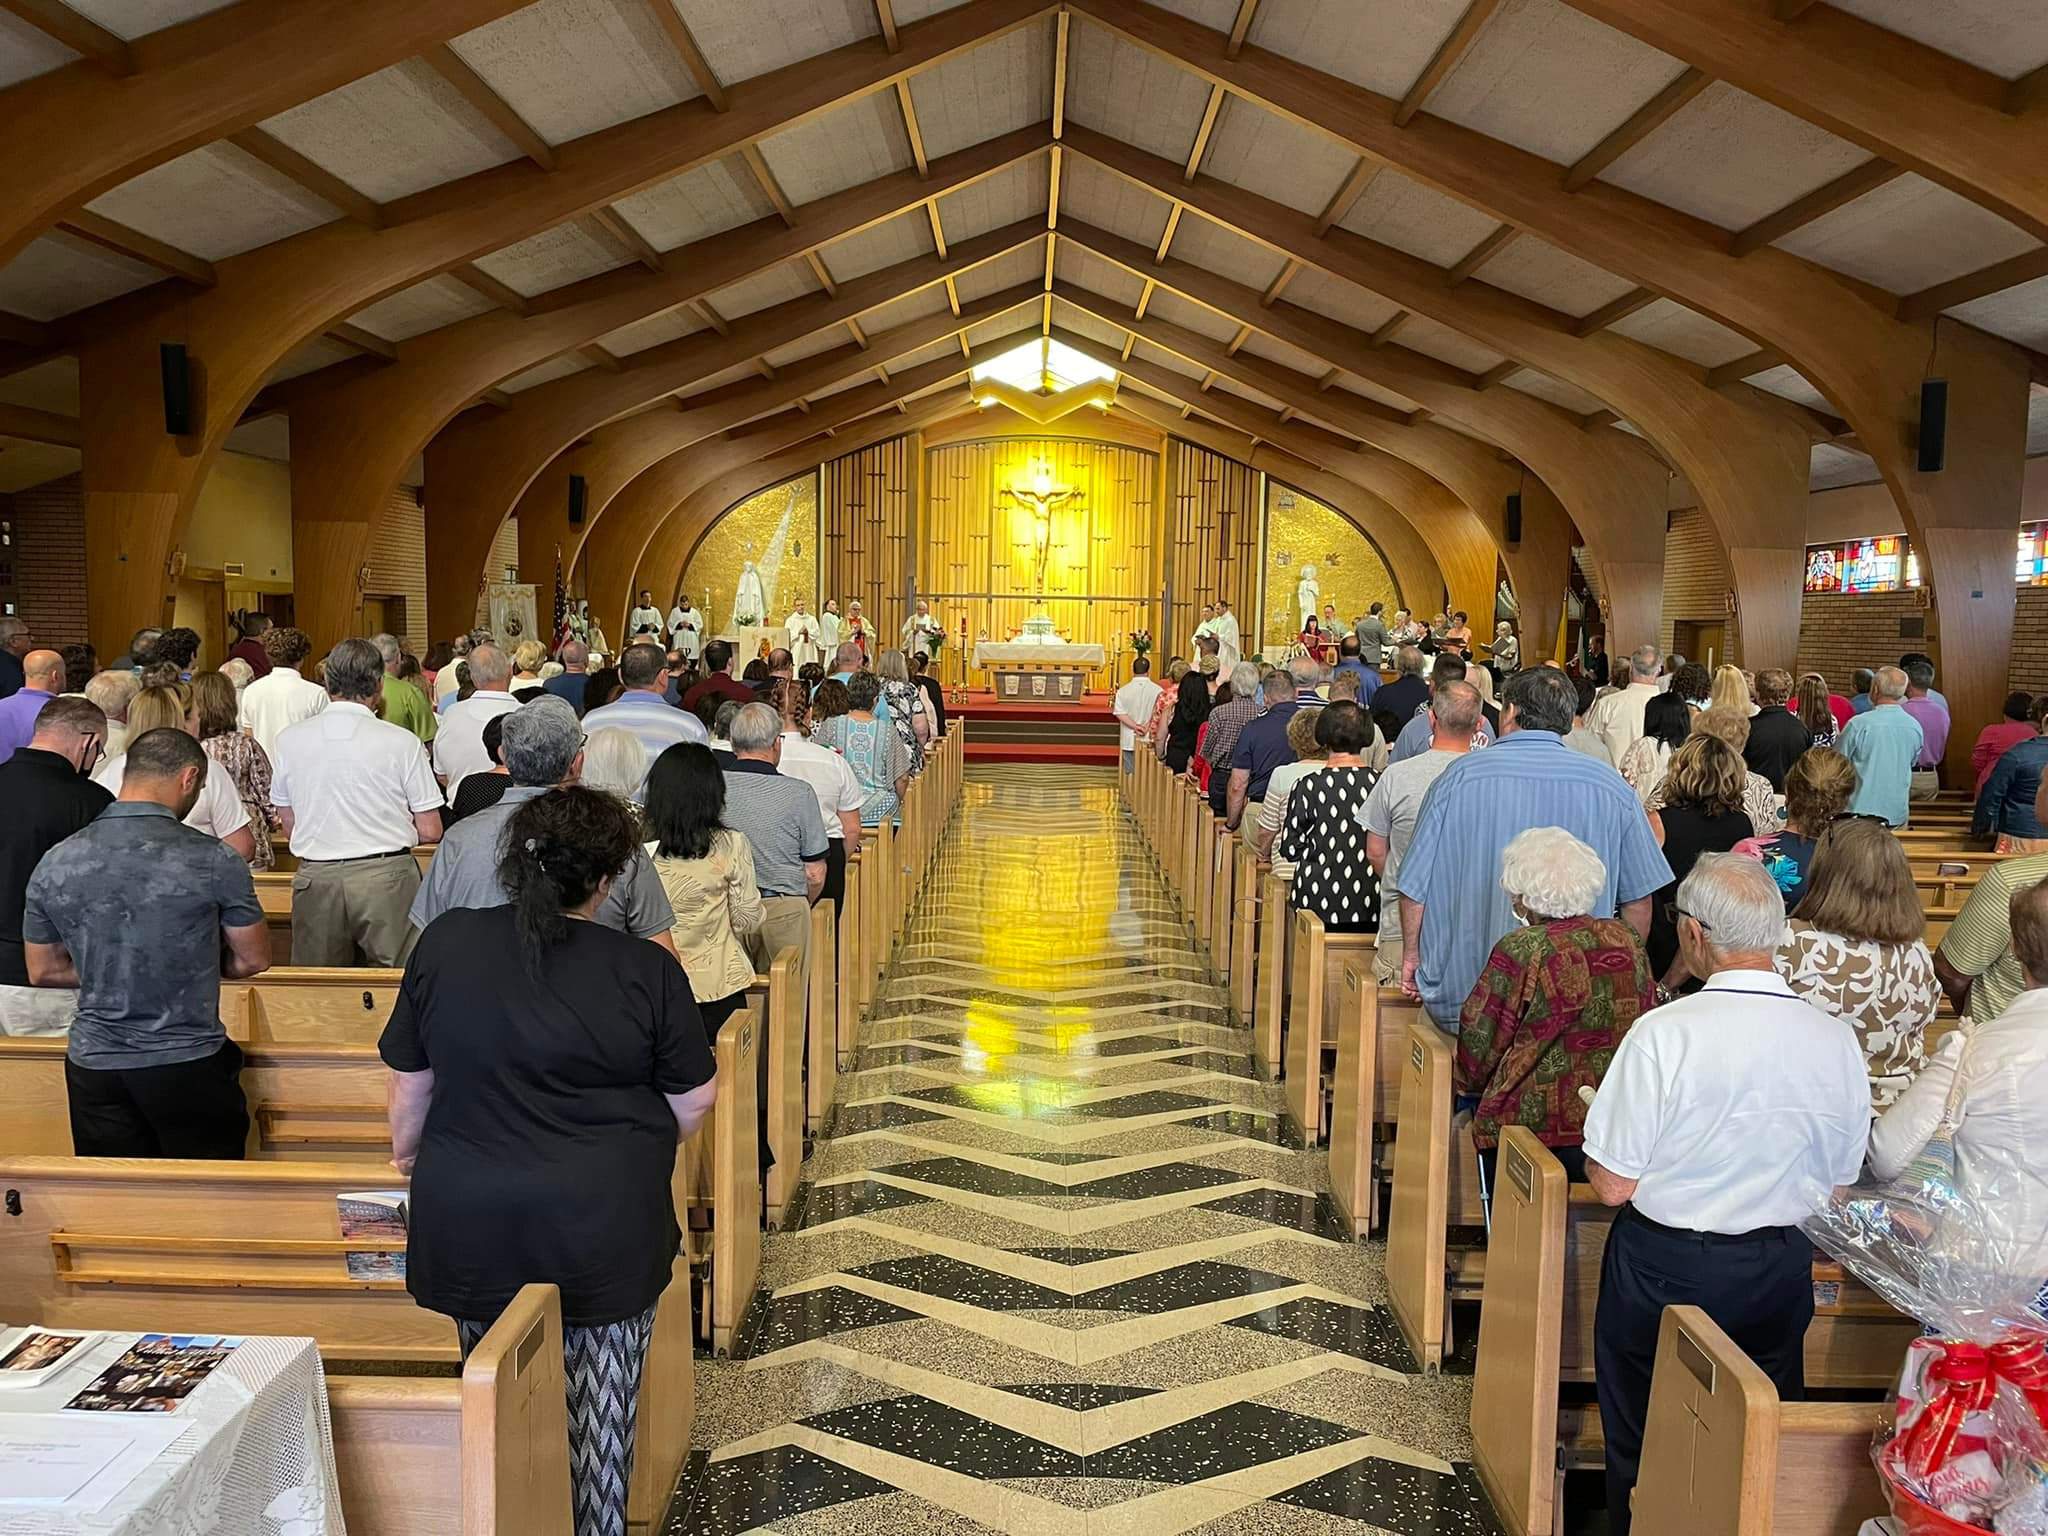 Parishioners stand at Mass. Angle is from the back of the sanctuary, in the center of the aisle.